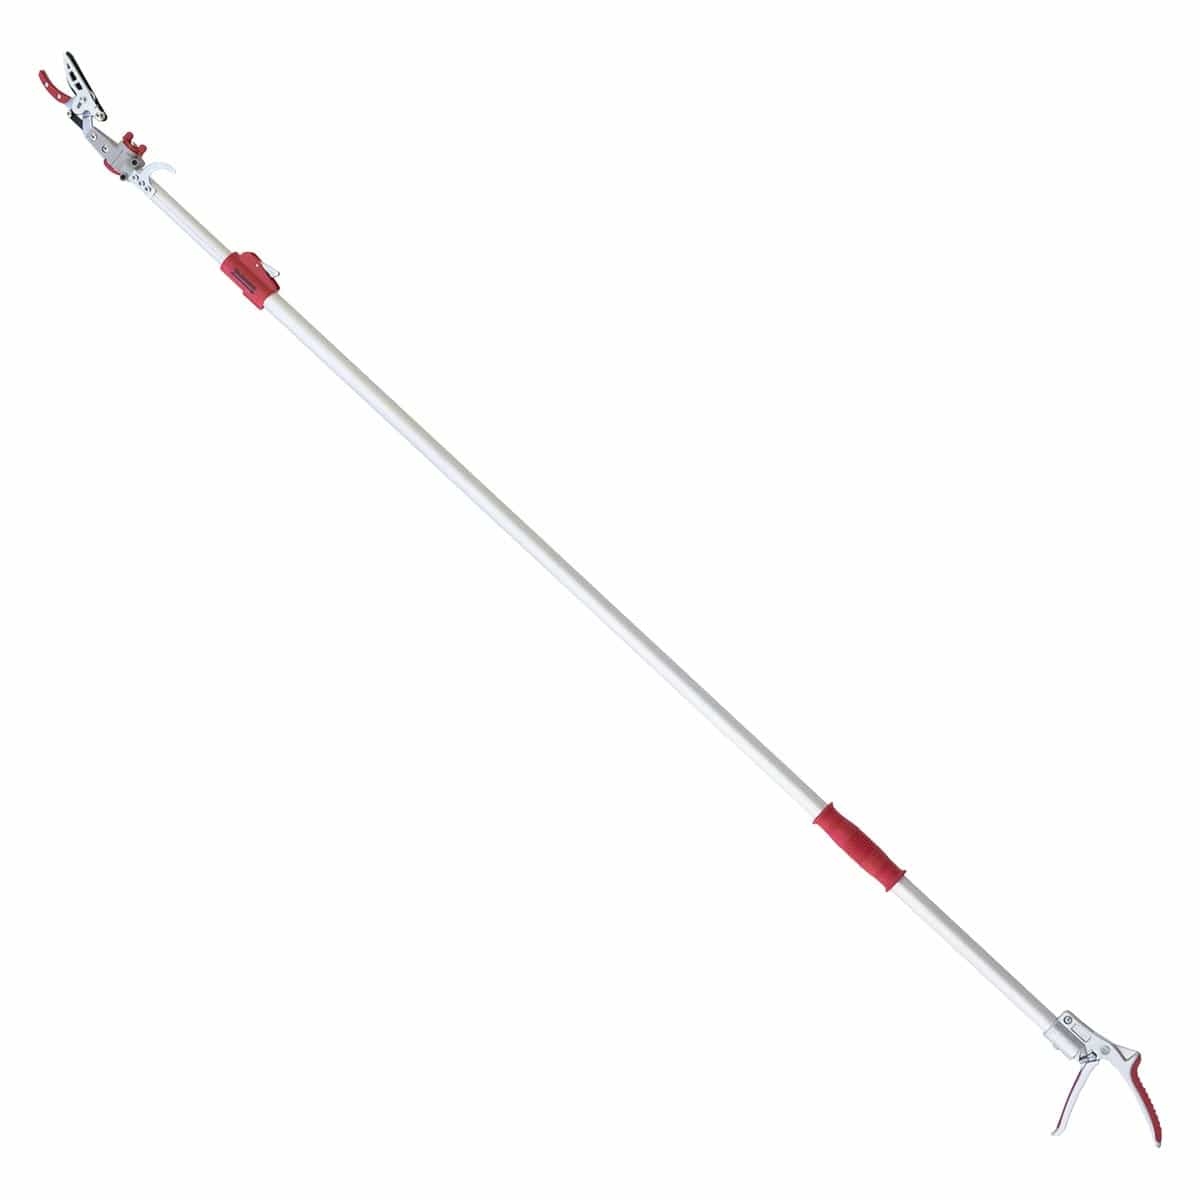 Gemplers Telescoping Long-Reach Cut-and-Hold Pruner